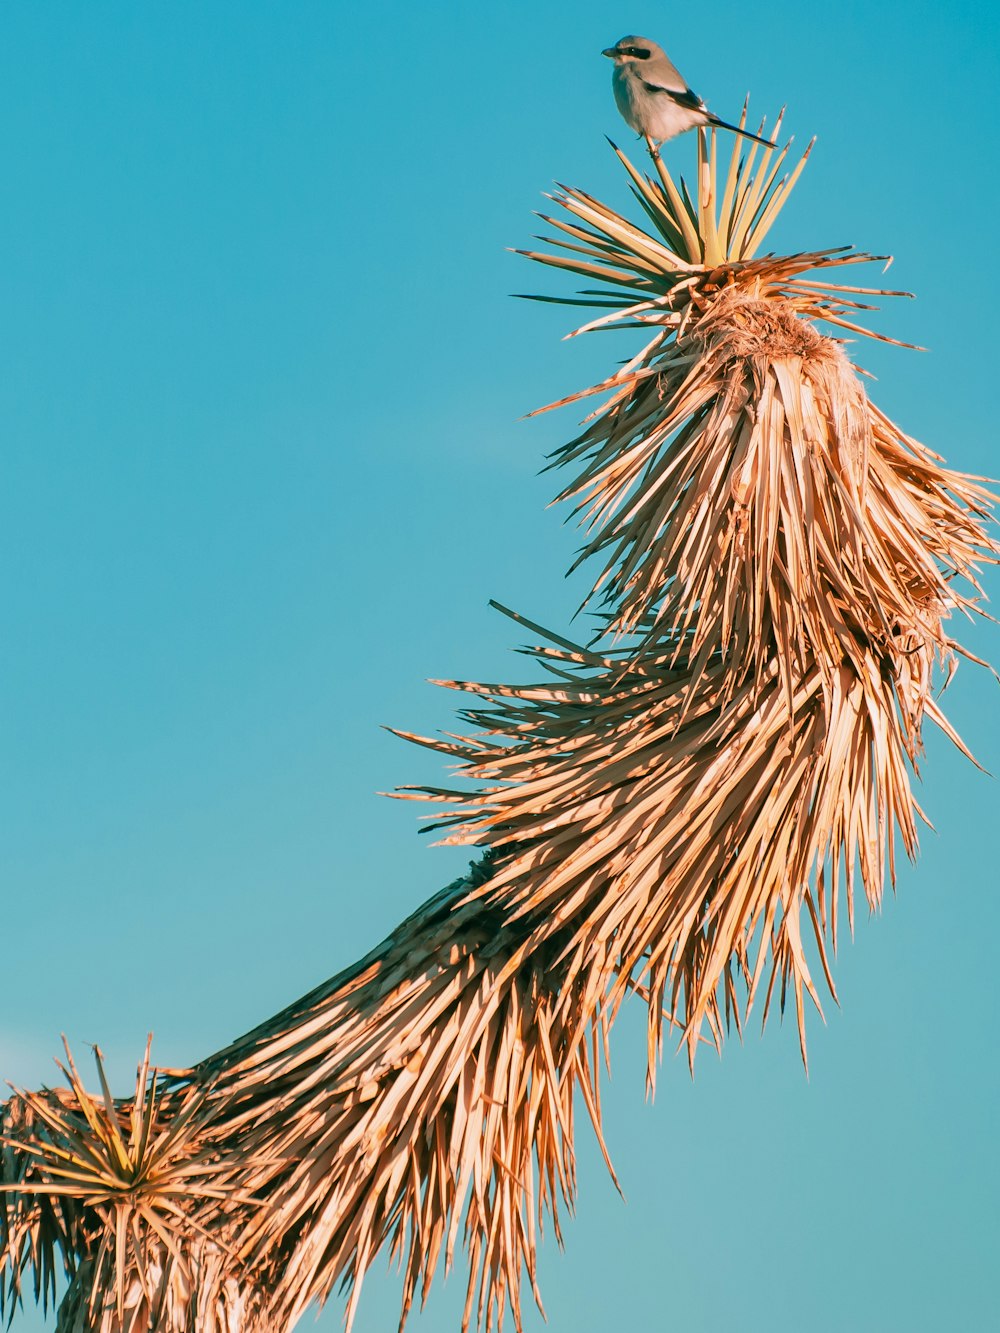 green and brown palm tree under blue sky during daytime